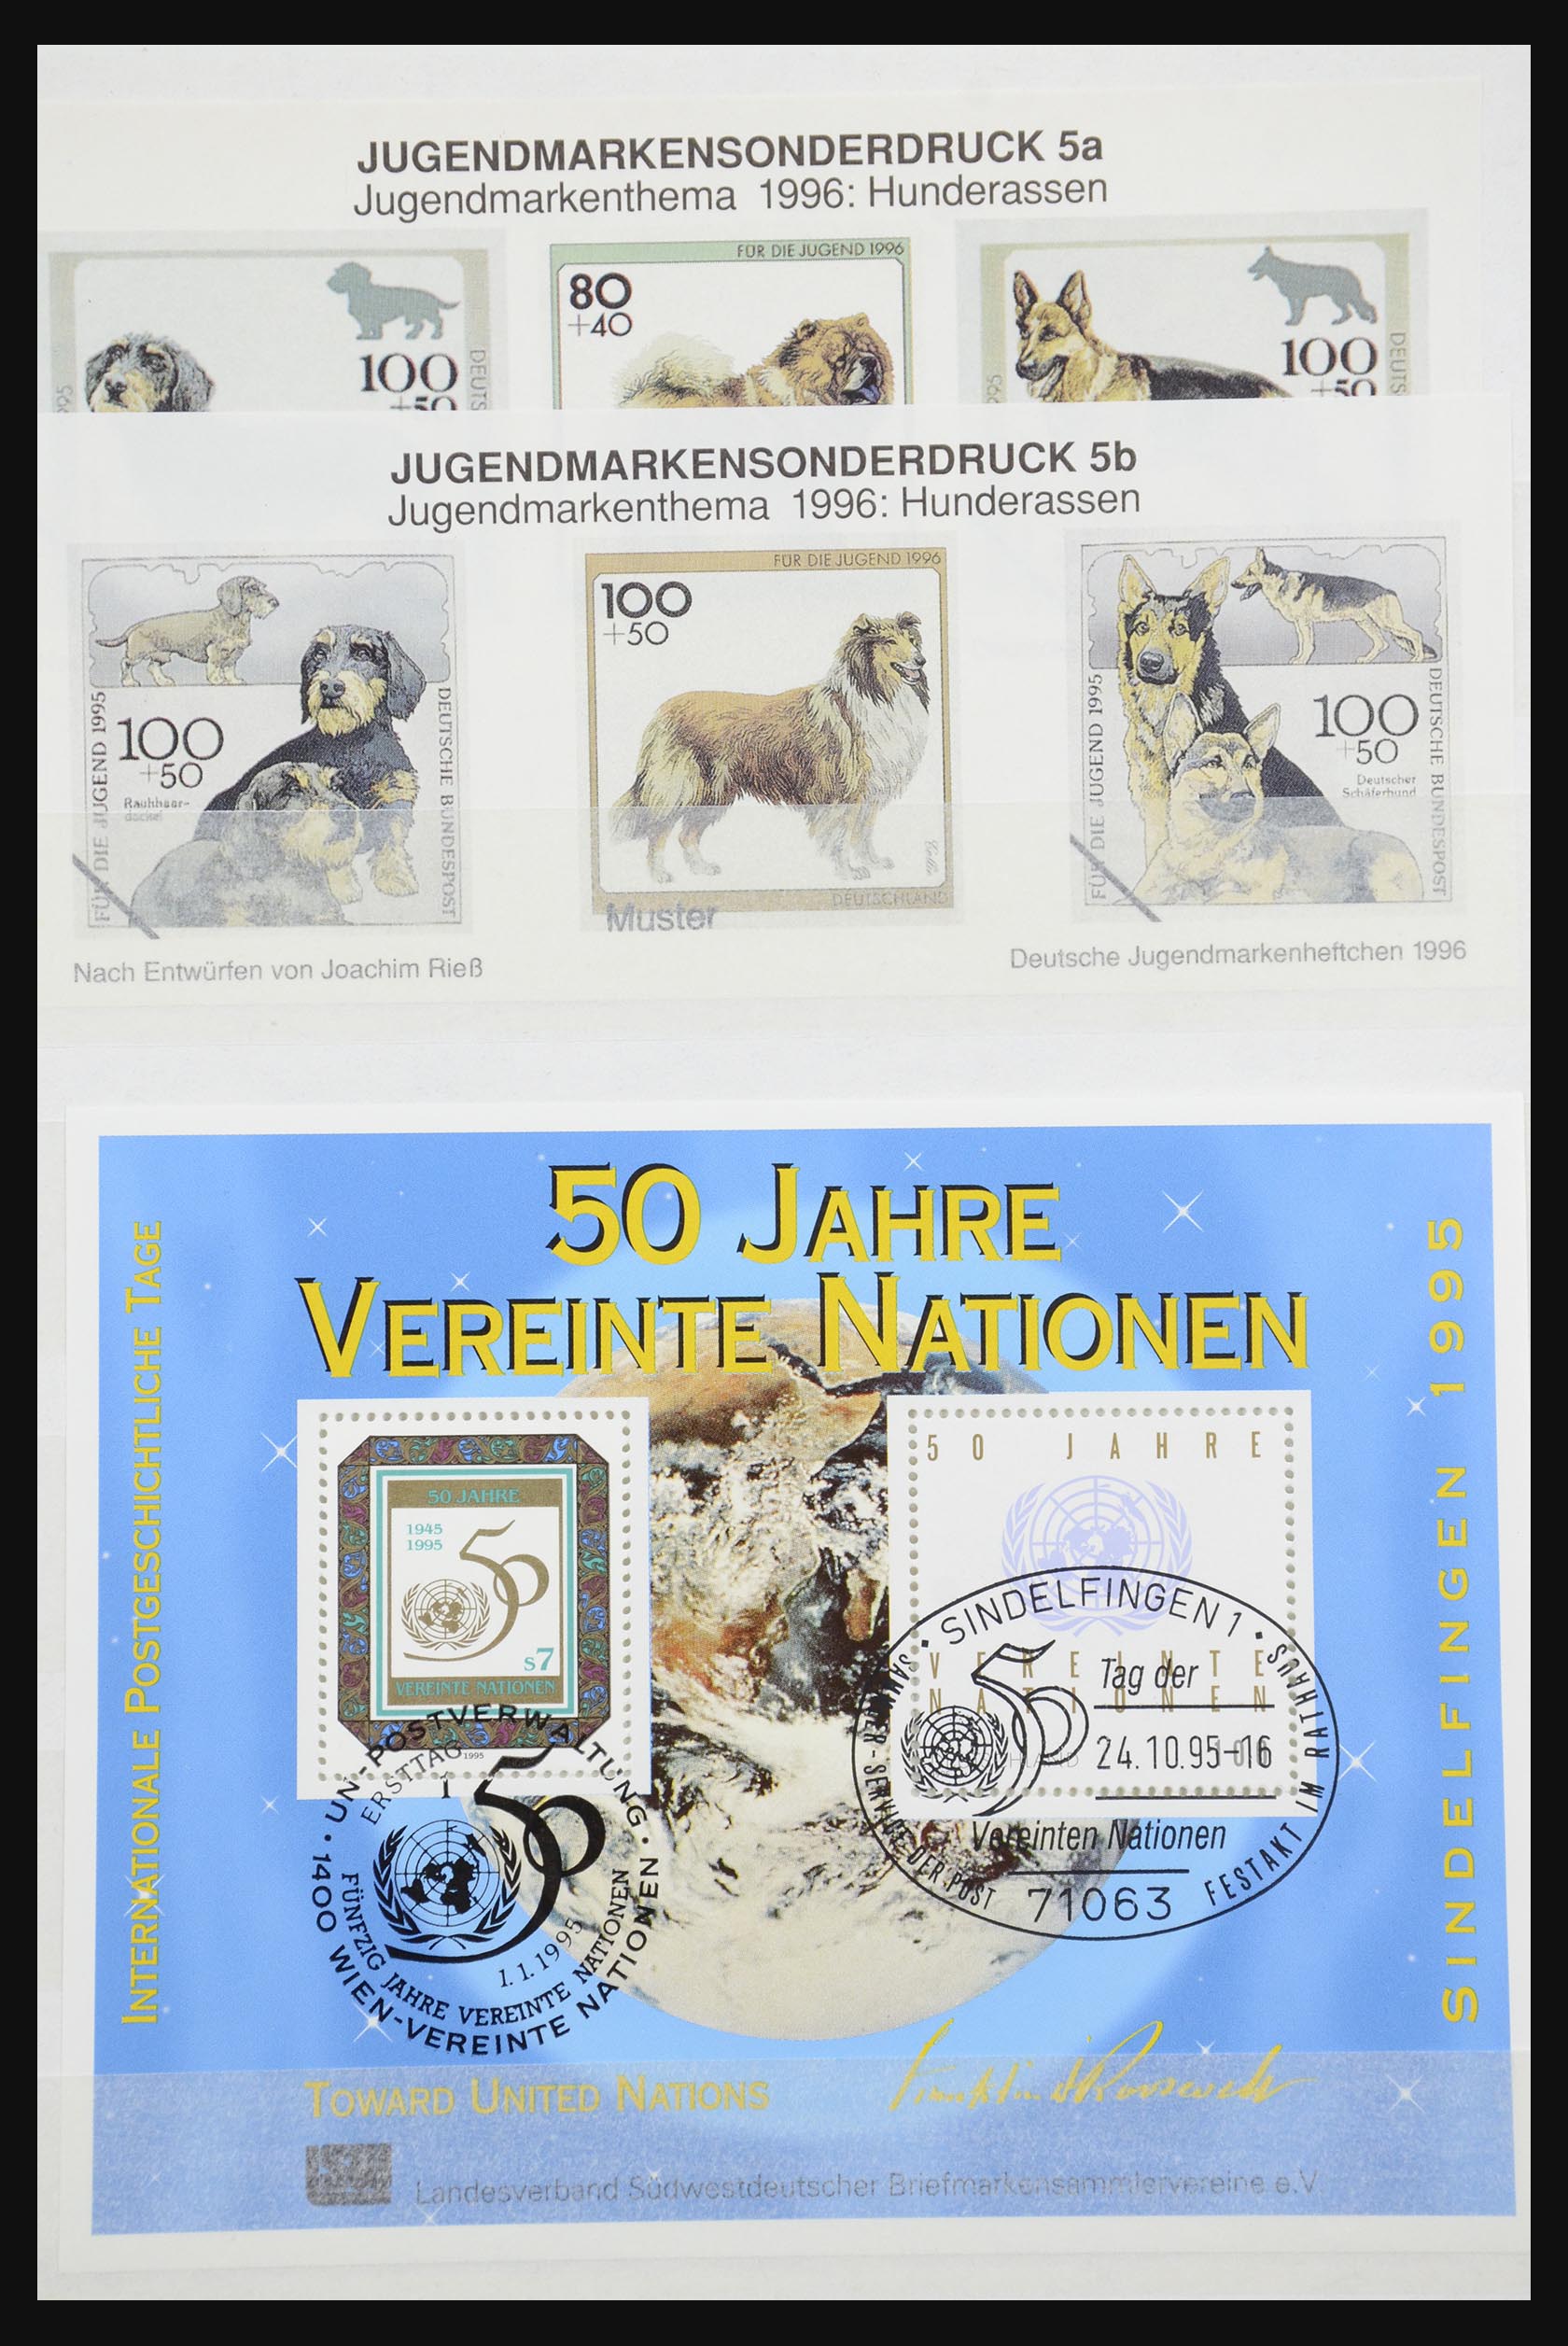 32050 056 - 32050 Bundespost special sheets 1980-2010.